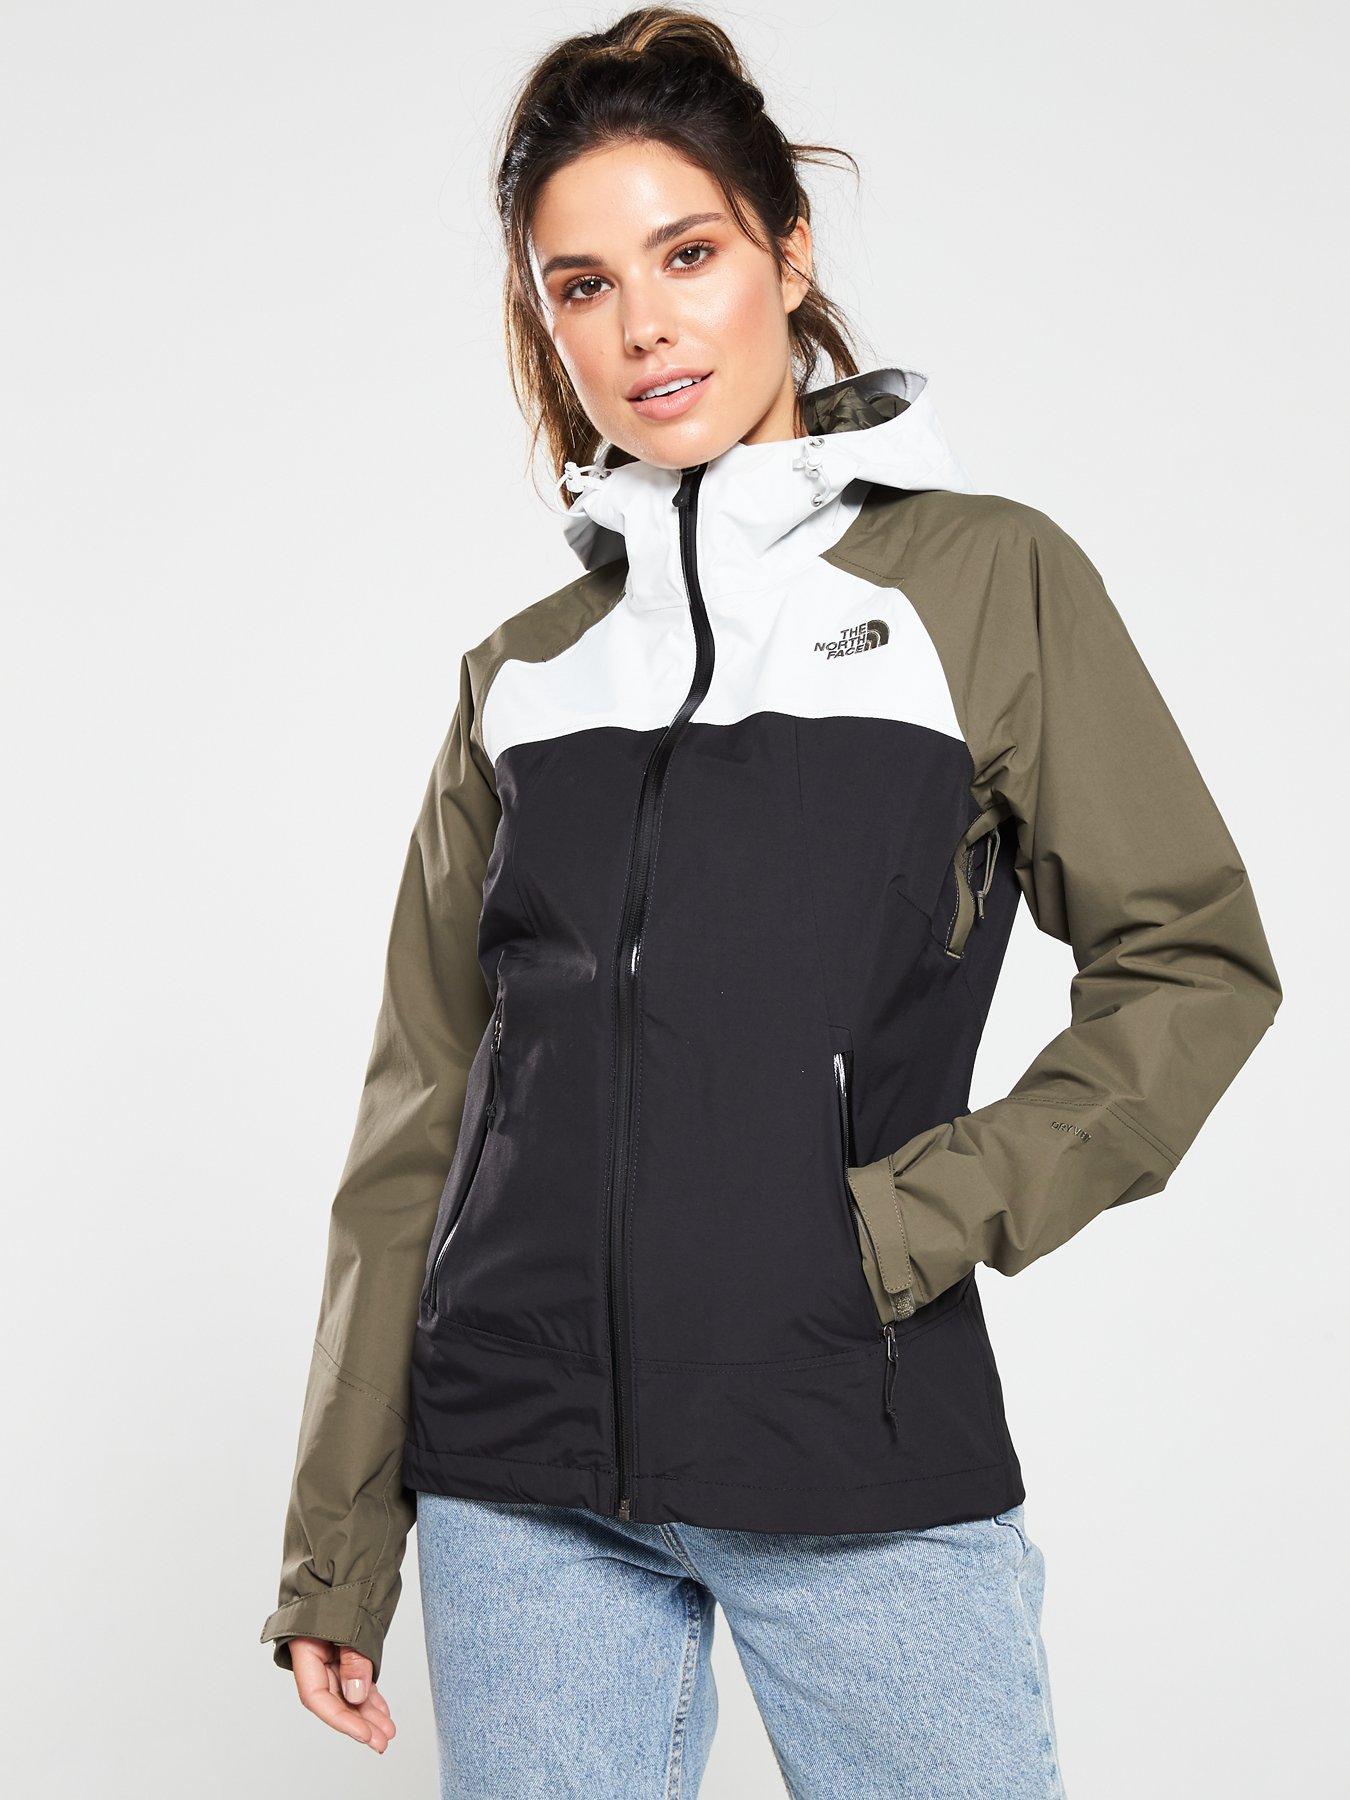 north face stratos jacket sale